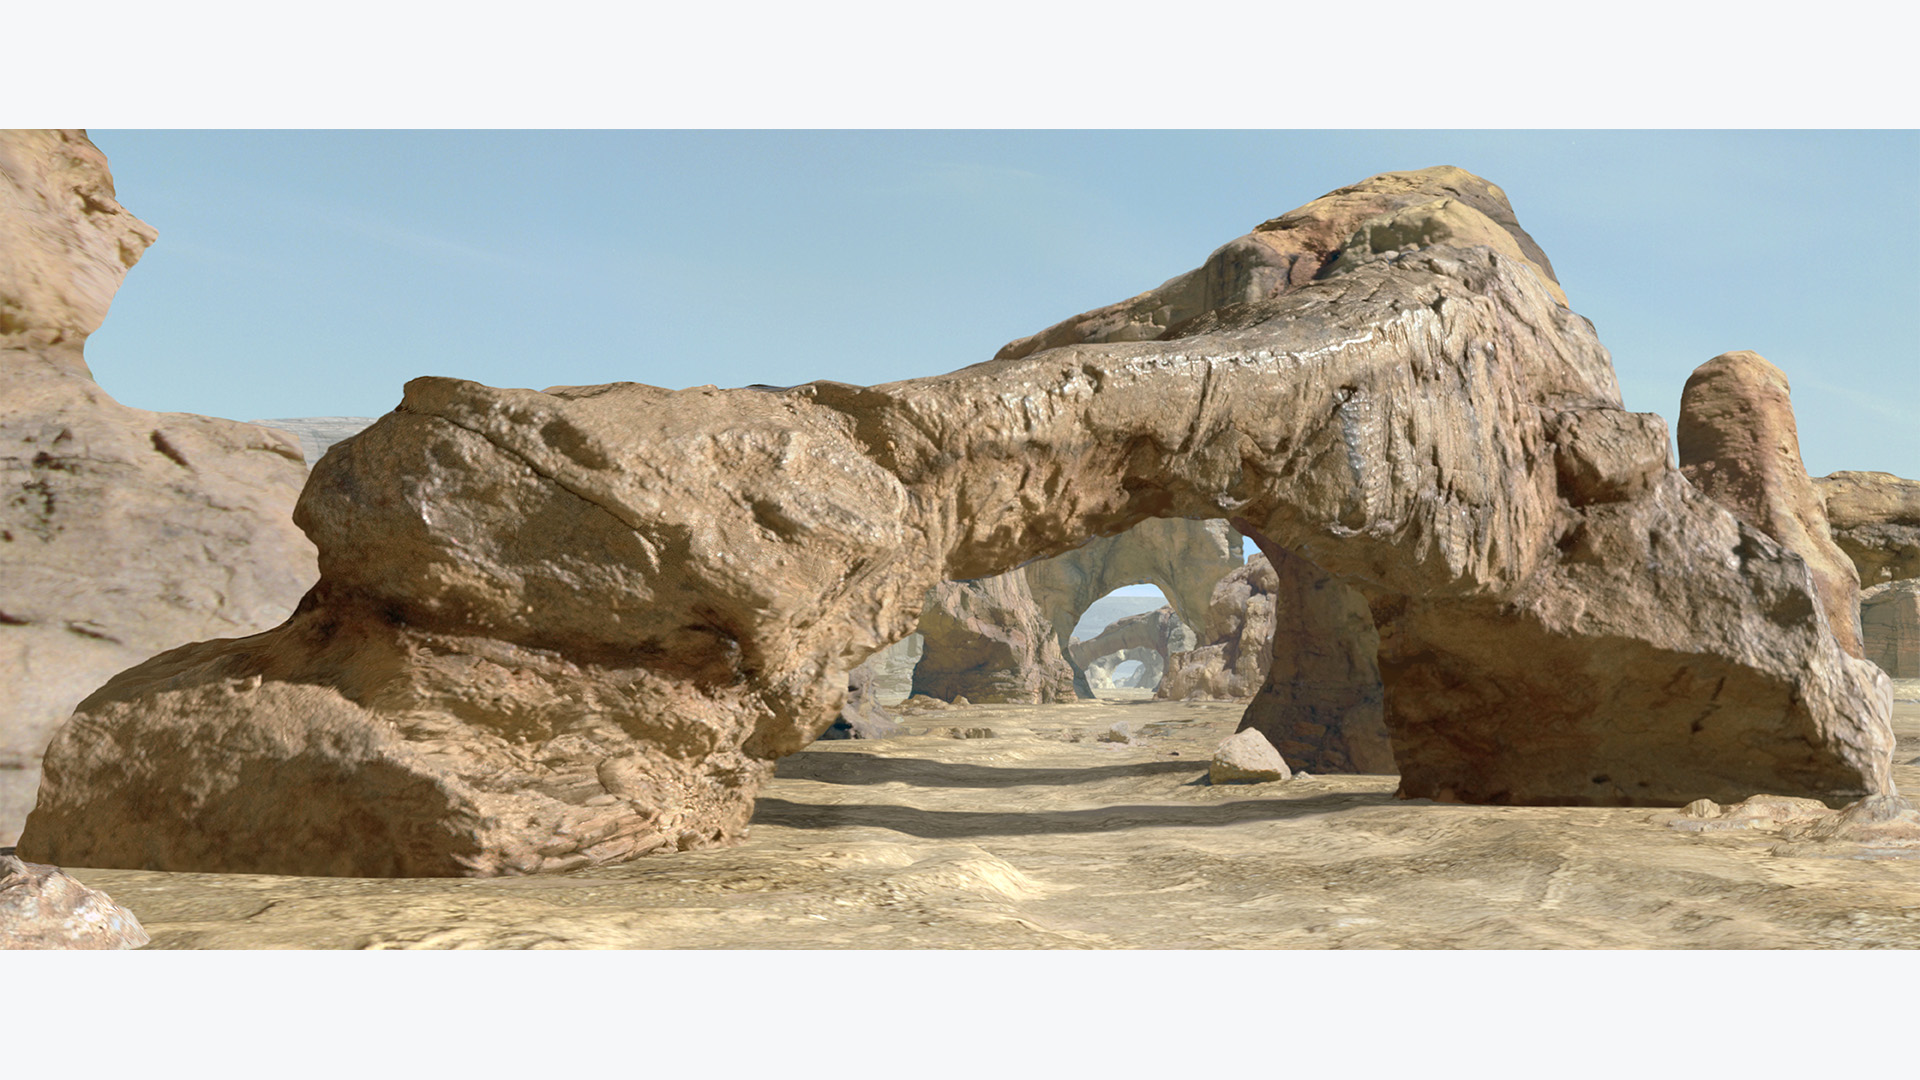 An archway on the podrace course on Tatooine.